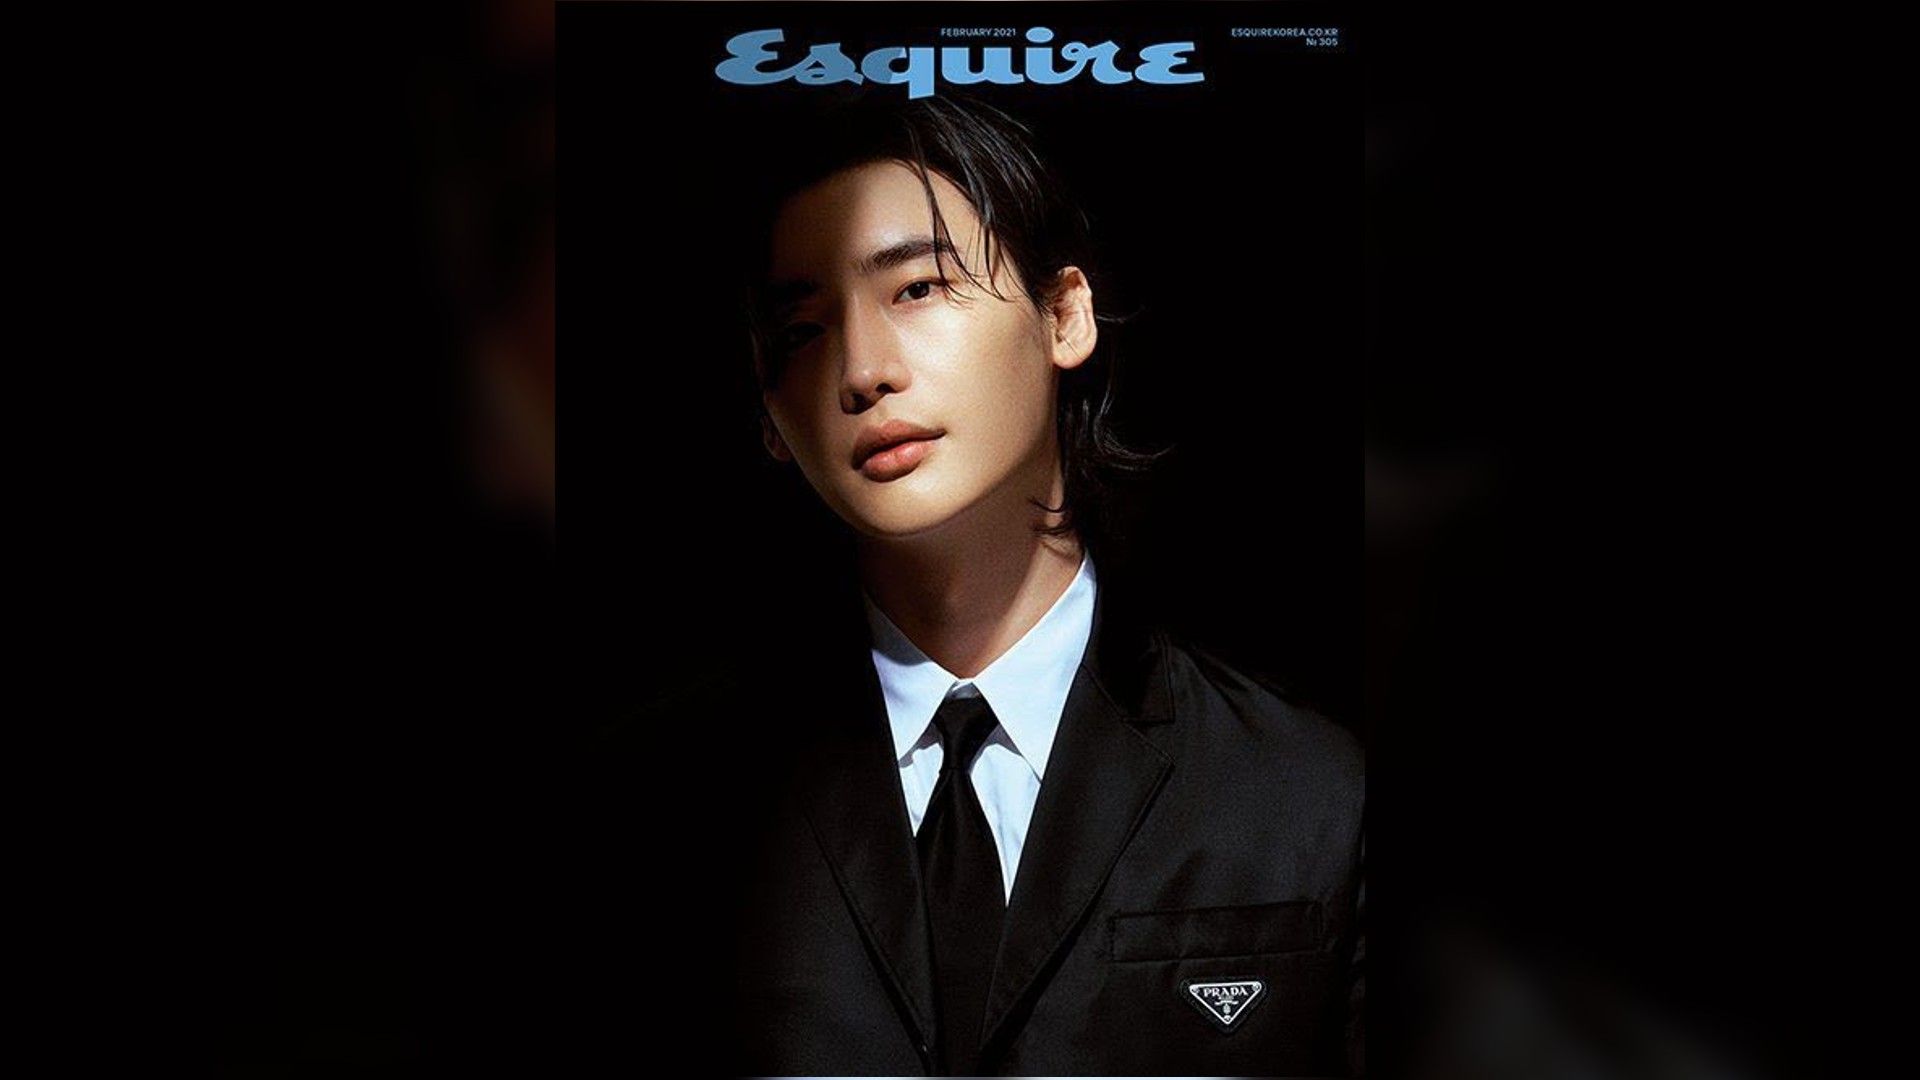 Lee Jong-Suk on the cover of Esquire Korea